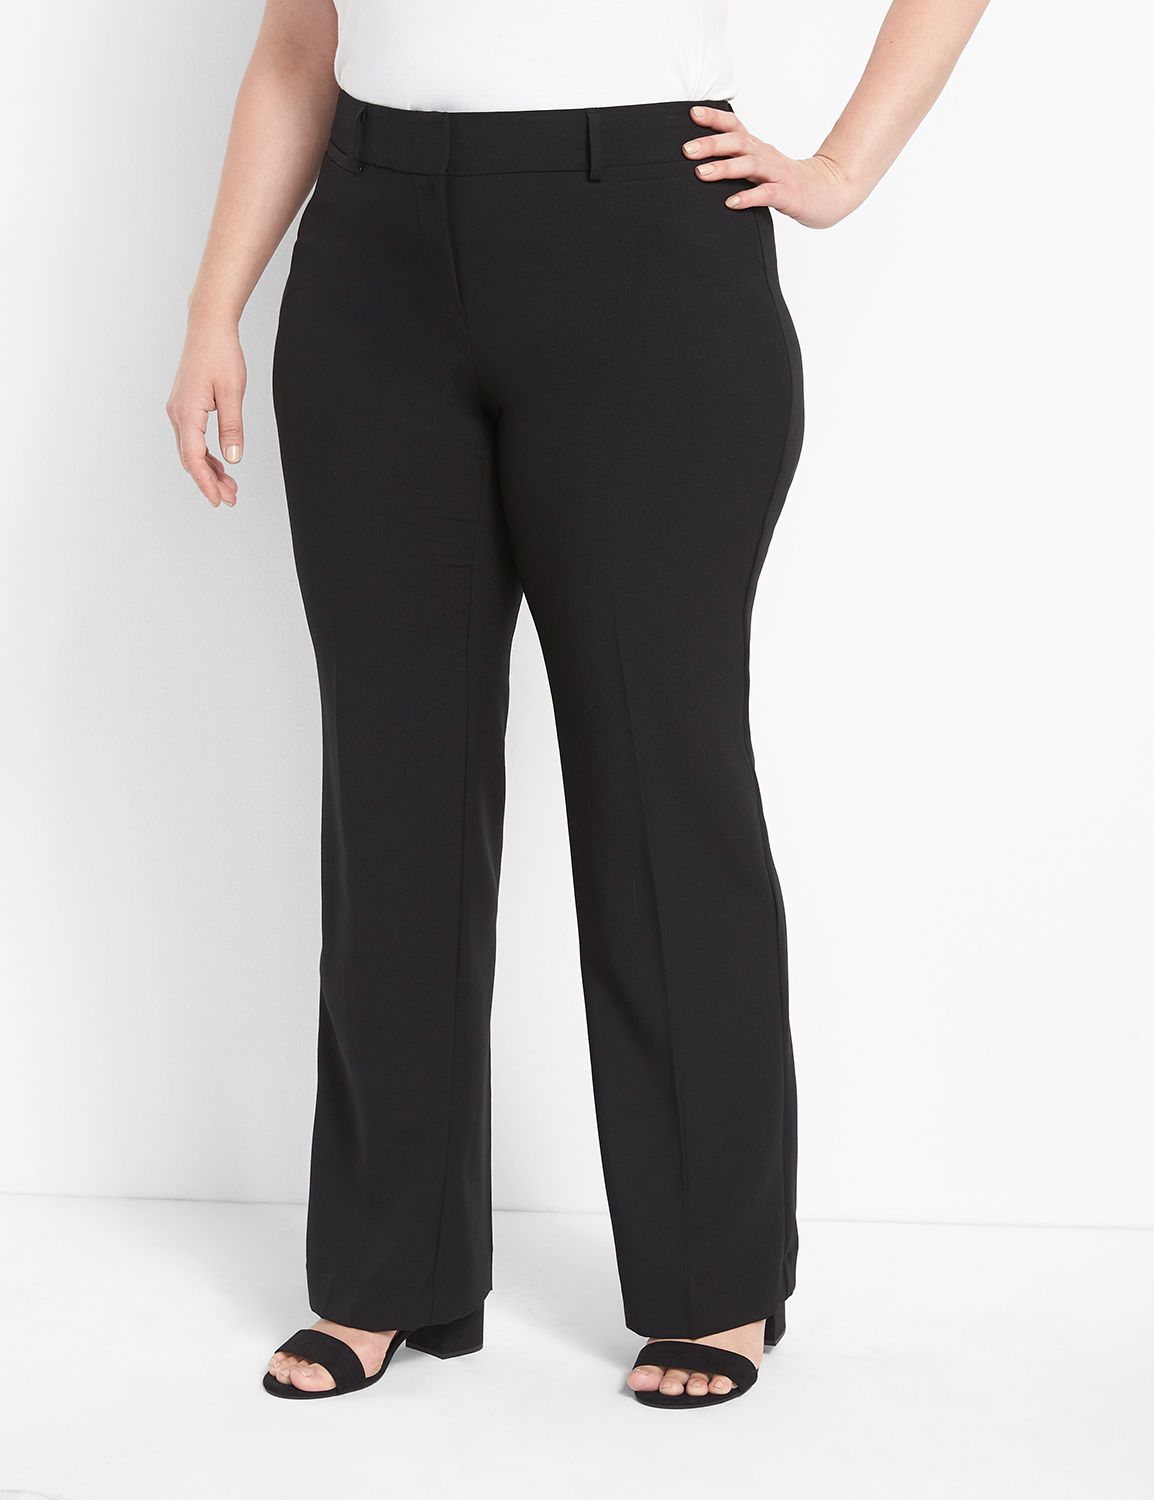 Black Best Sellers in Plus Size Clothing